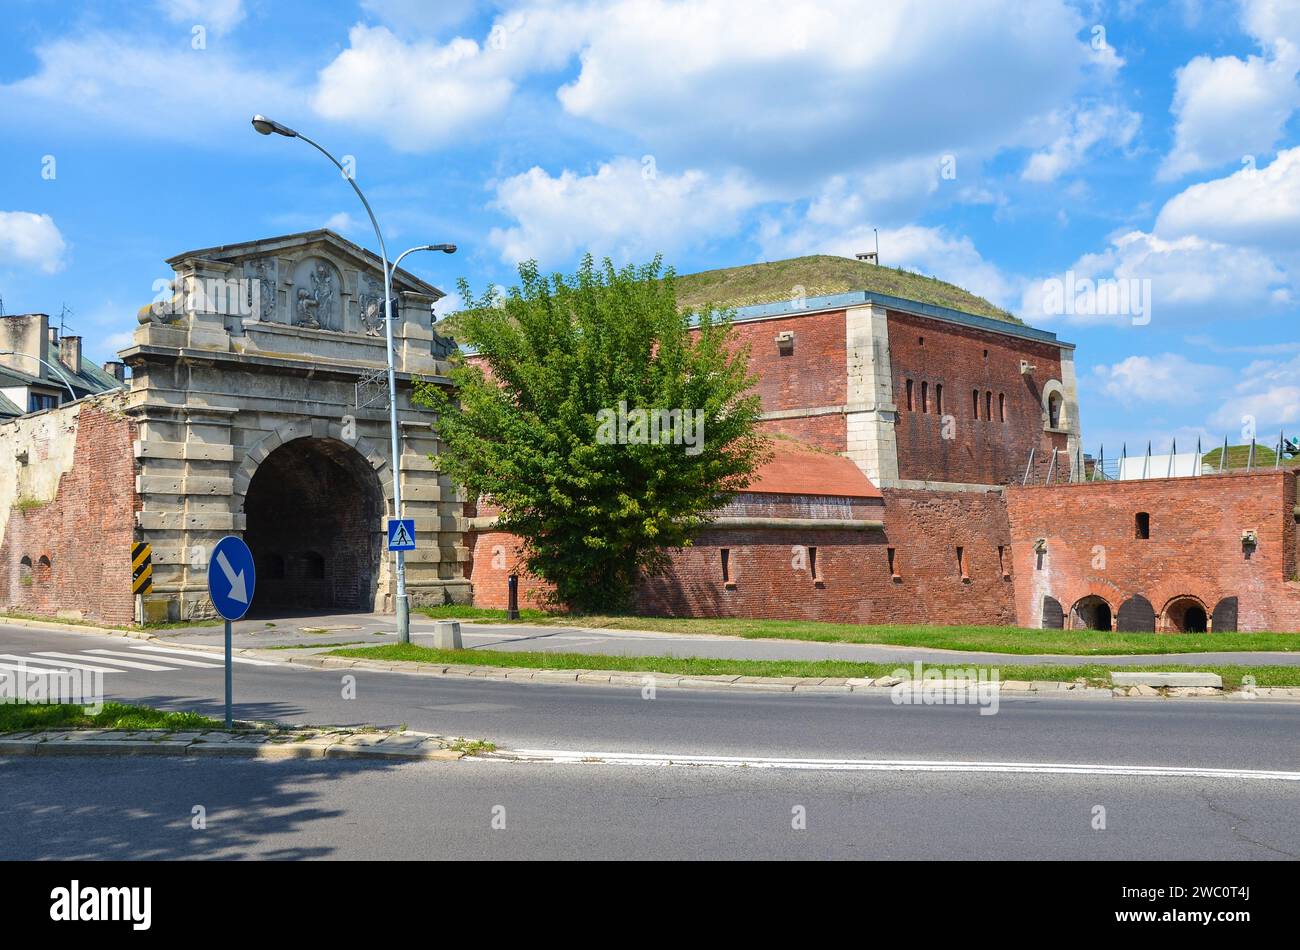 Fortifications of the fortress and city of Zamosc. View of the bastion VII and the Lwowska Gate. Zamosc is a historical city in southeastern Poland. Stock Photo